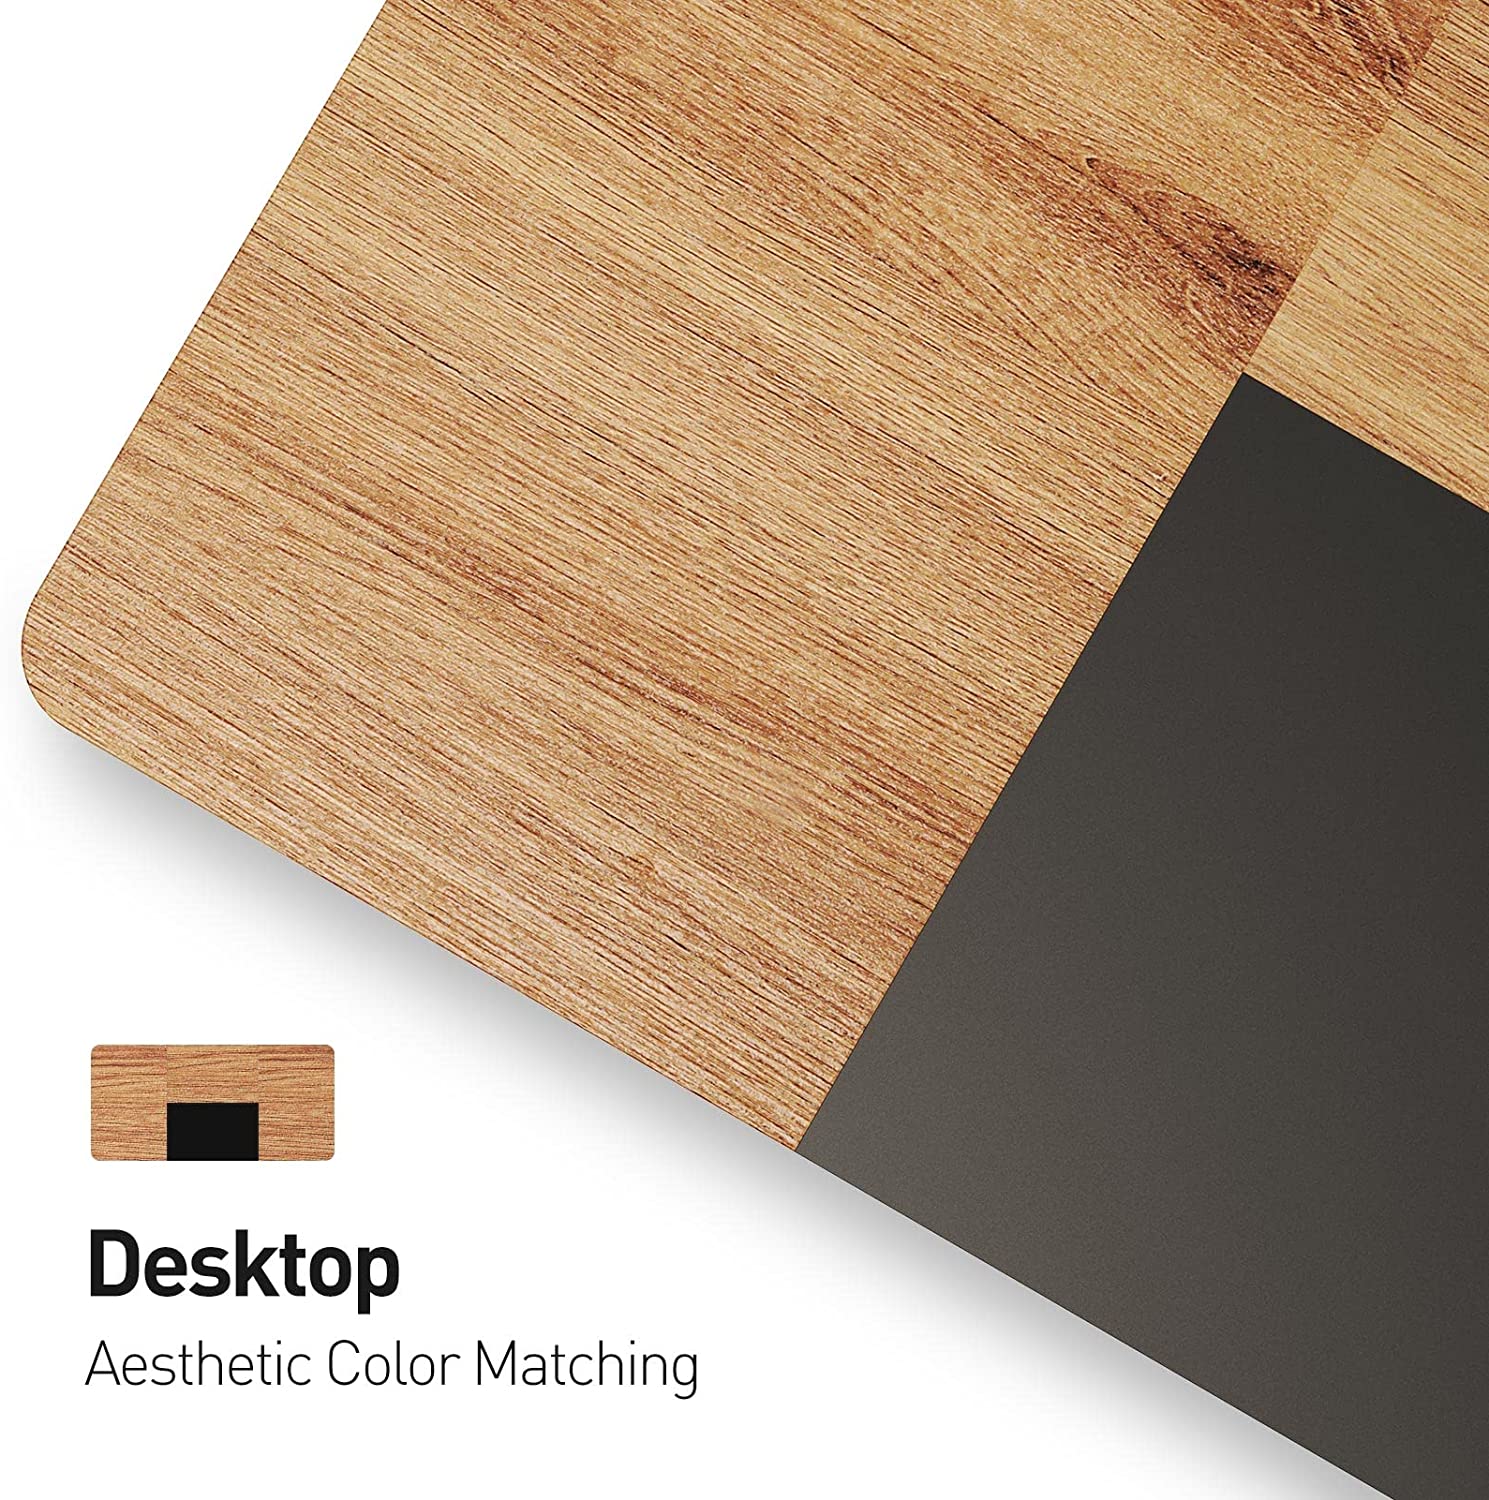 Deep Oak + Black standing desk with quality tabletop